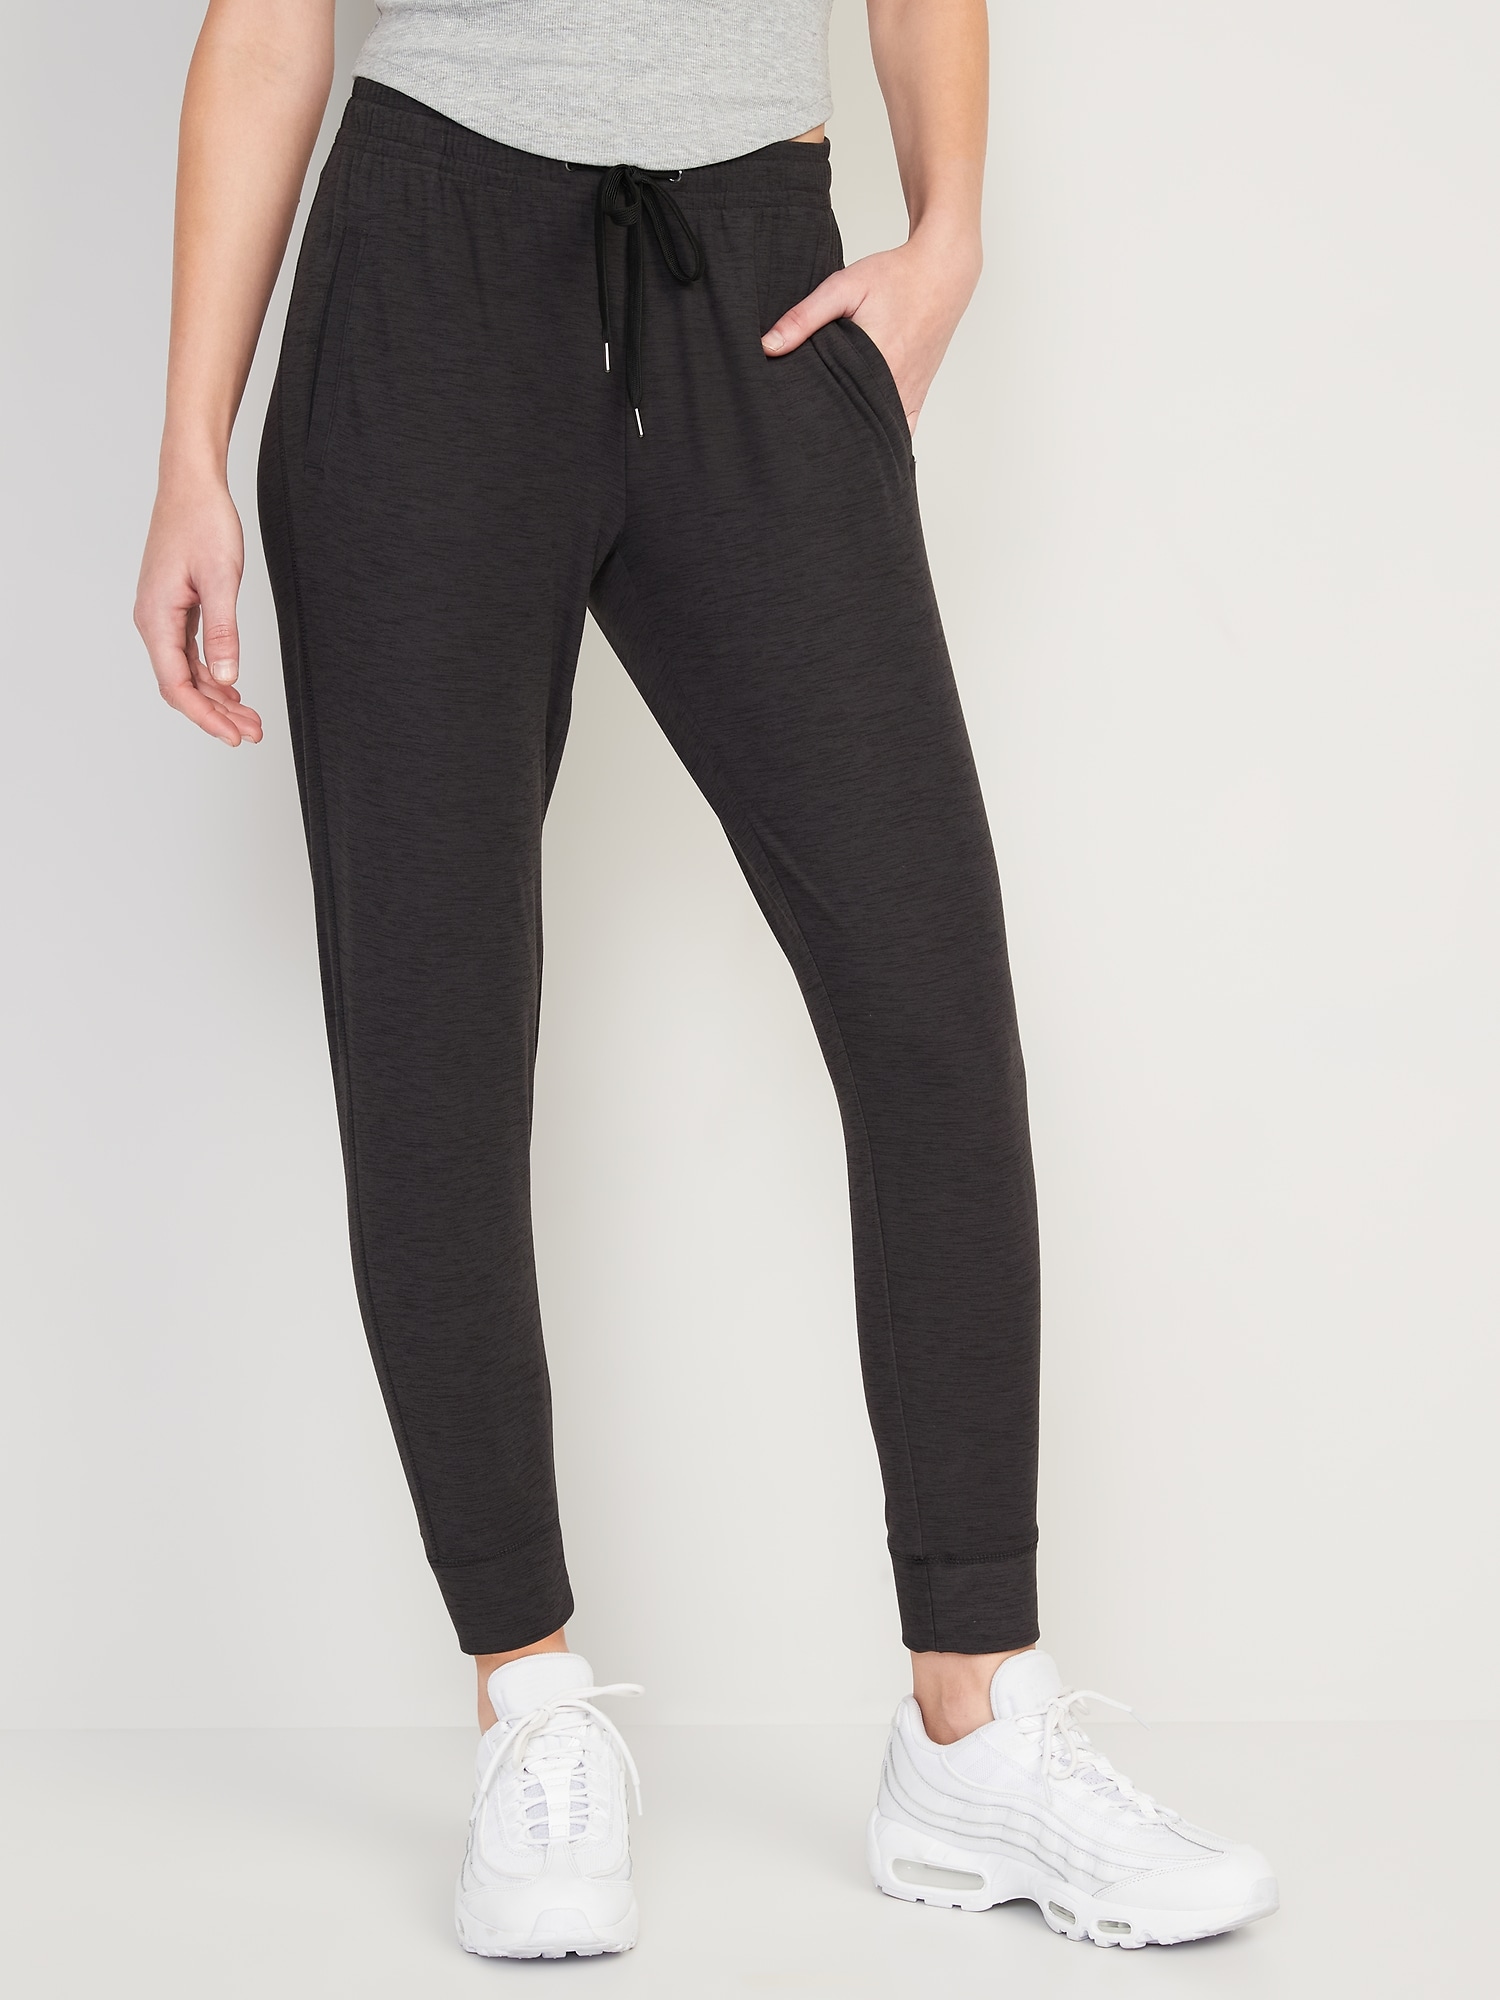 Old Navy Mid-Rise Breathe ON Jogger Pants for Women